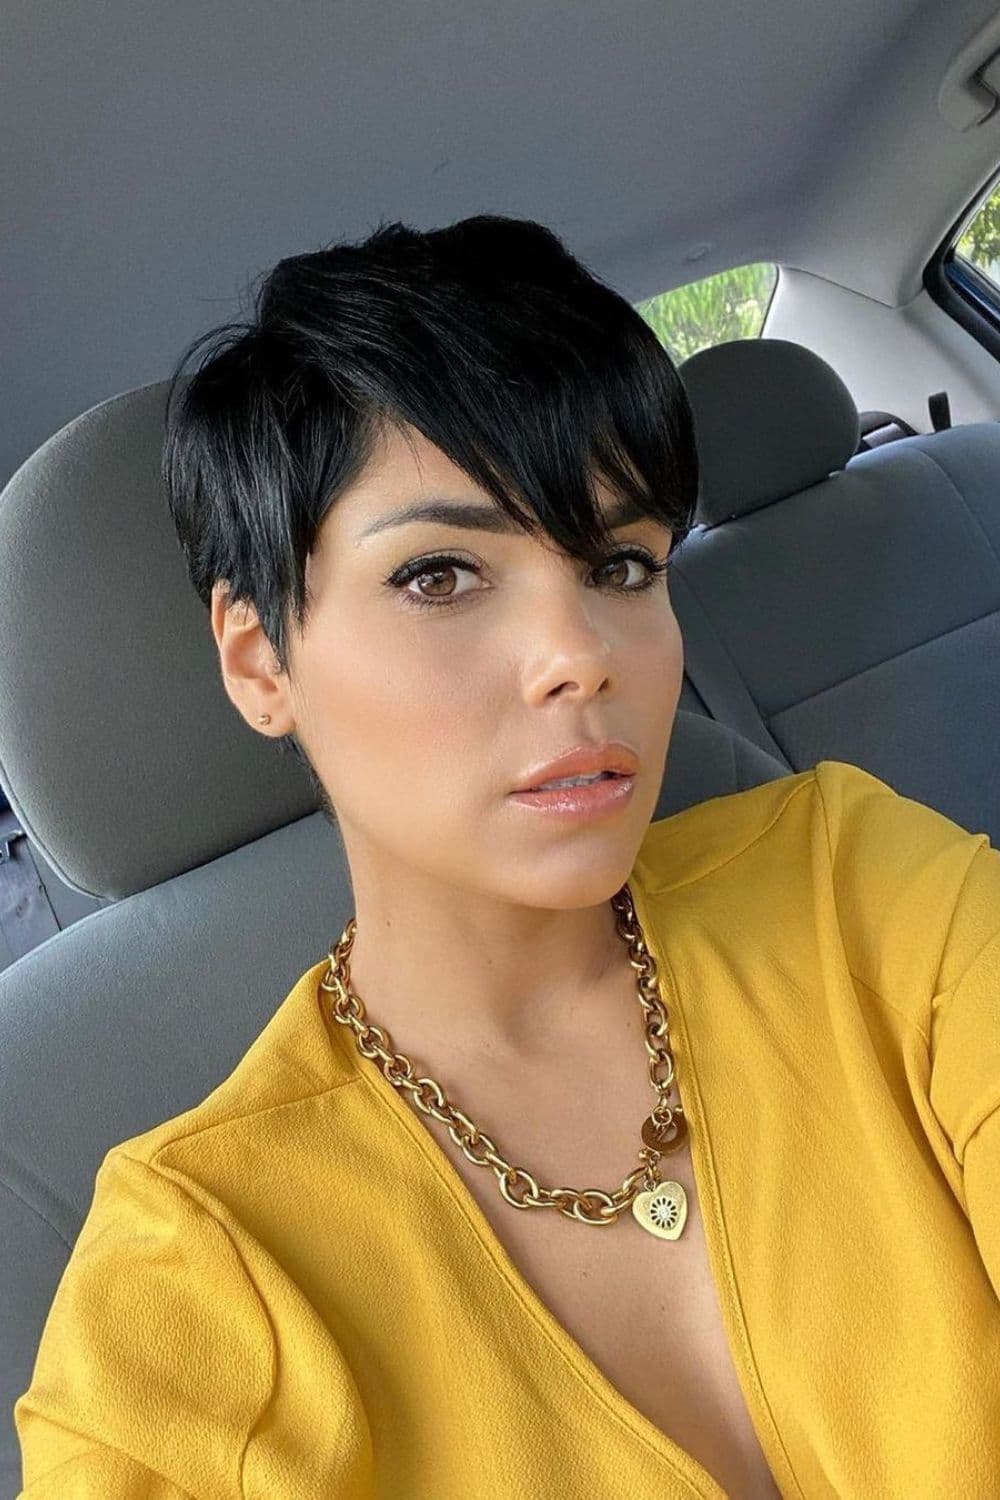 A woman with a black pixie cut with long side bangs.